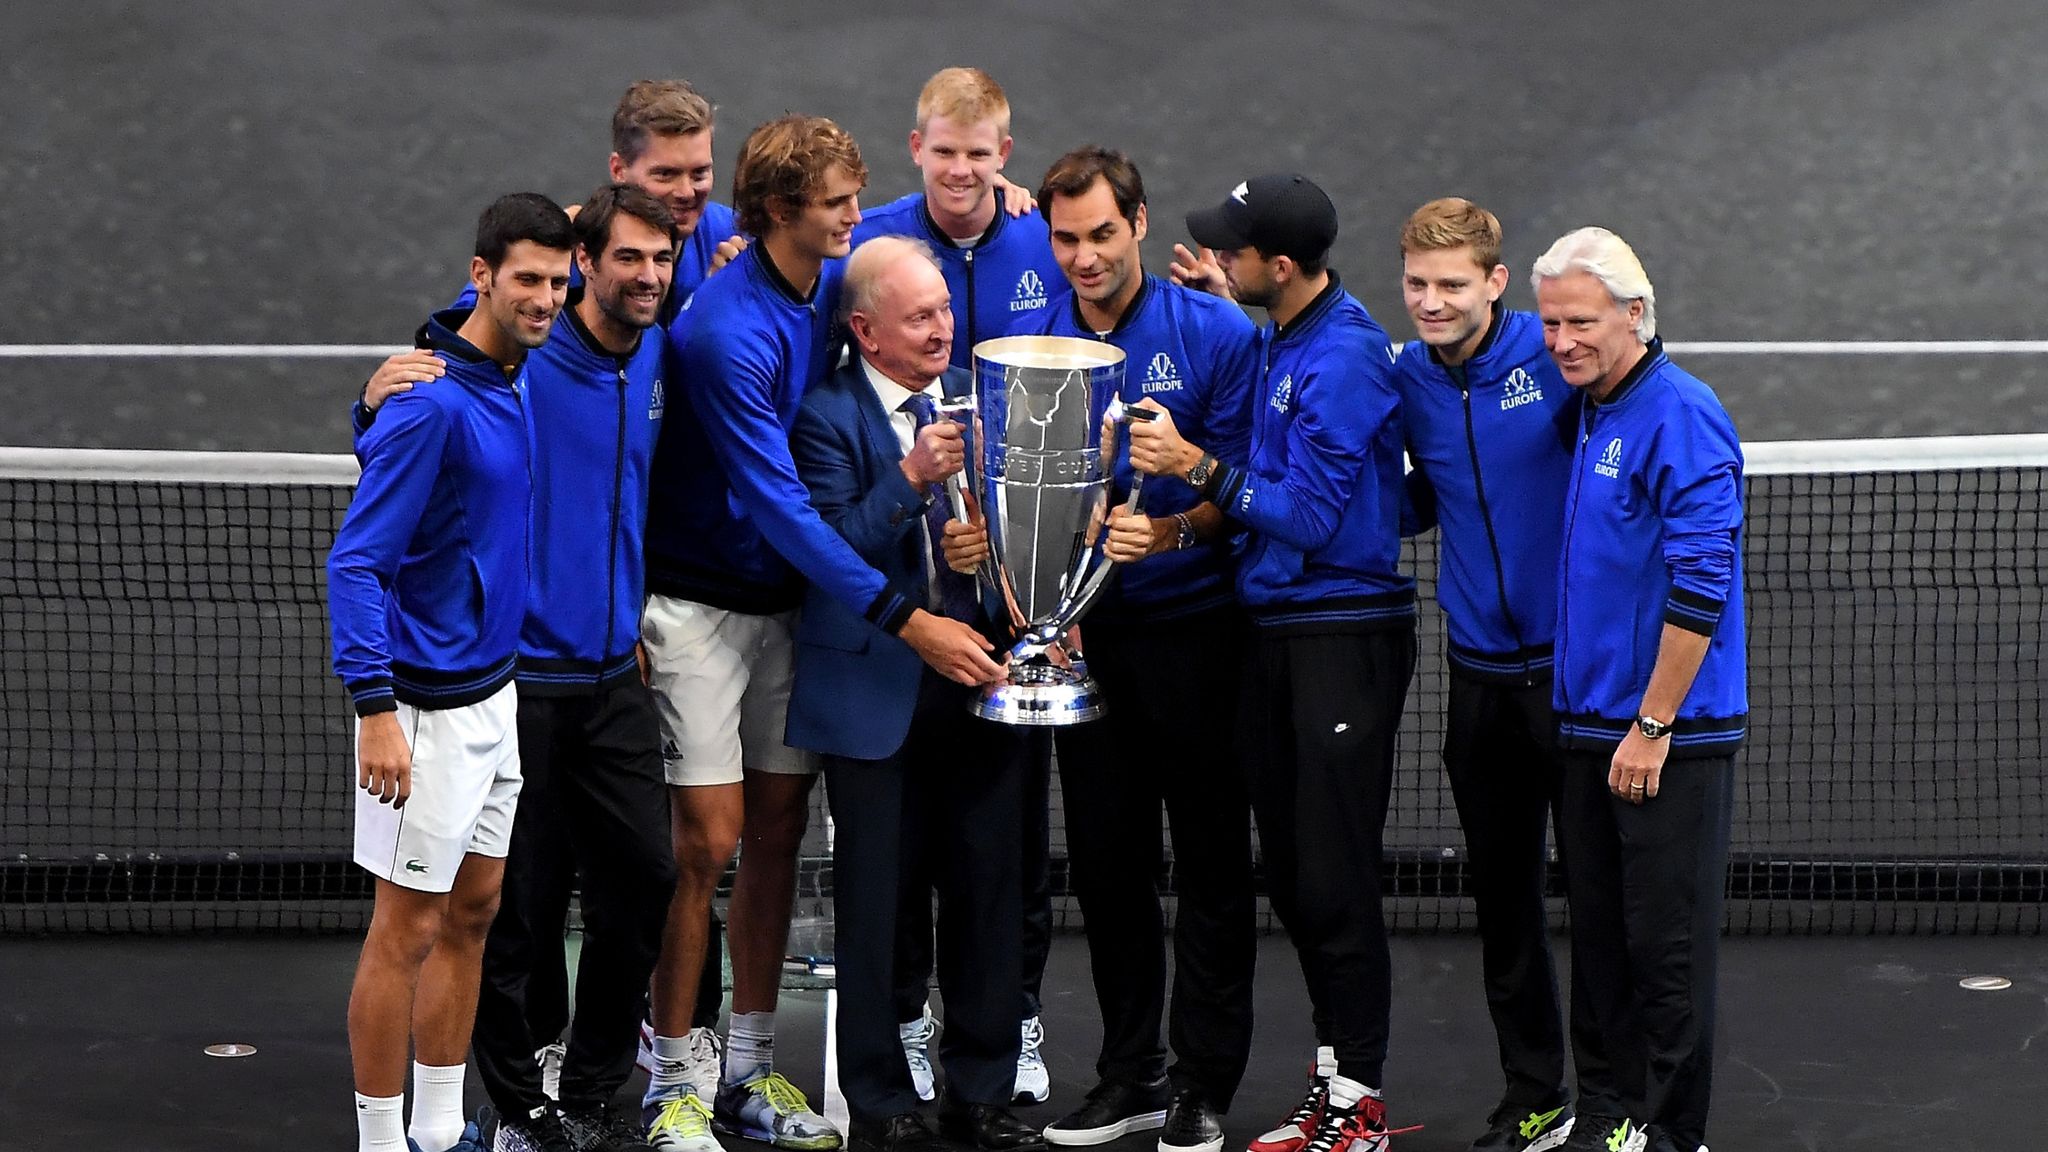 Roger Federer has been surprised by the success of the Laver Cup